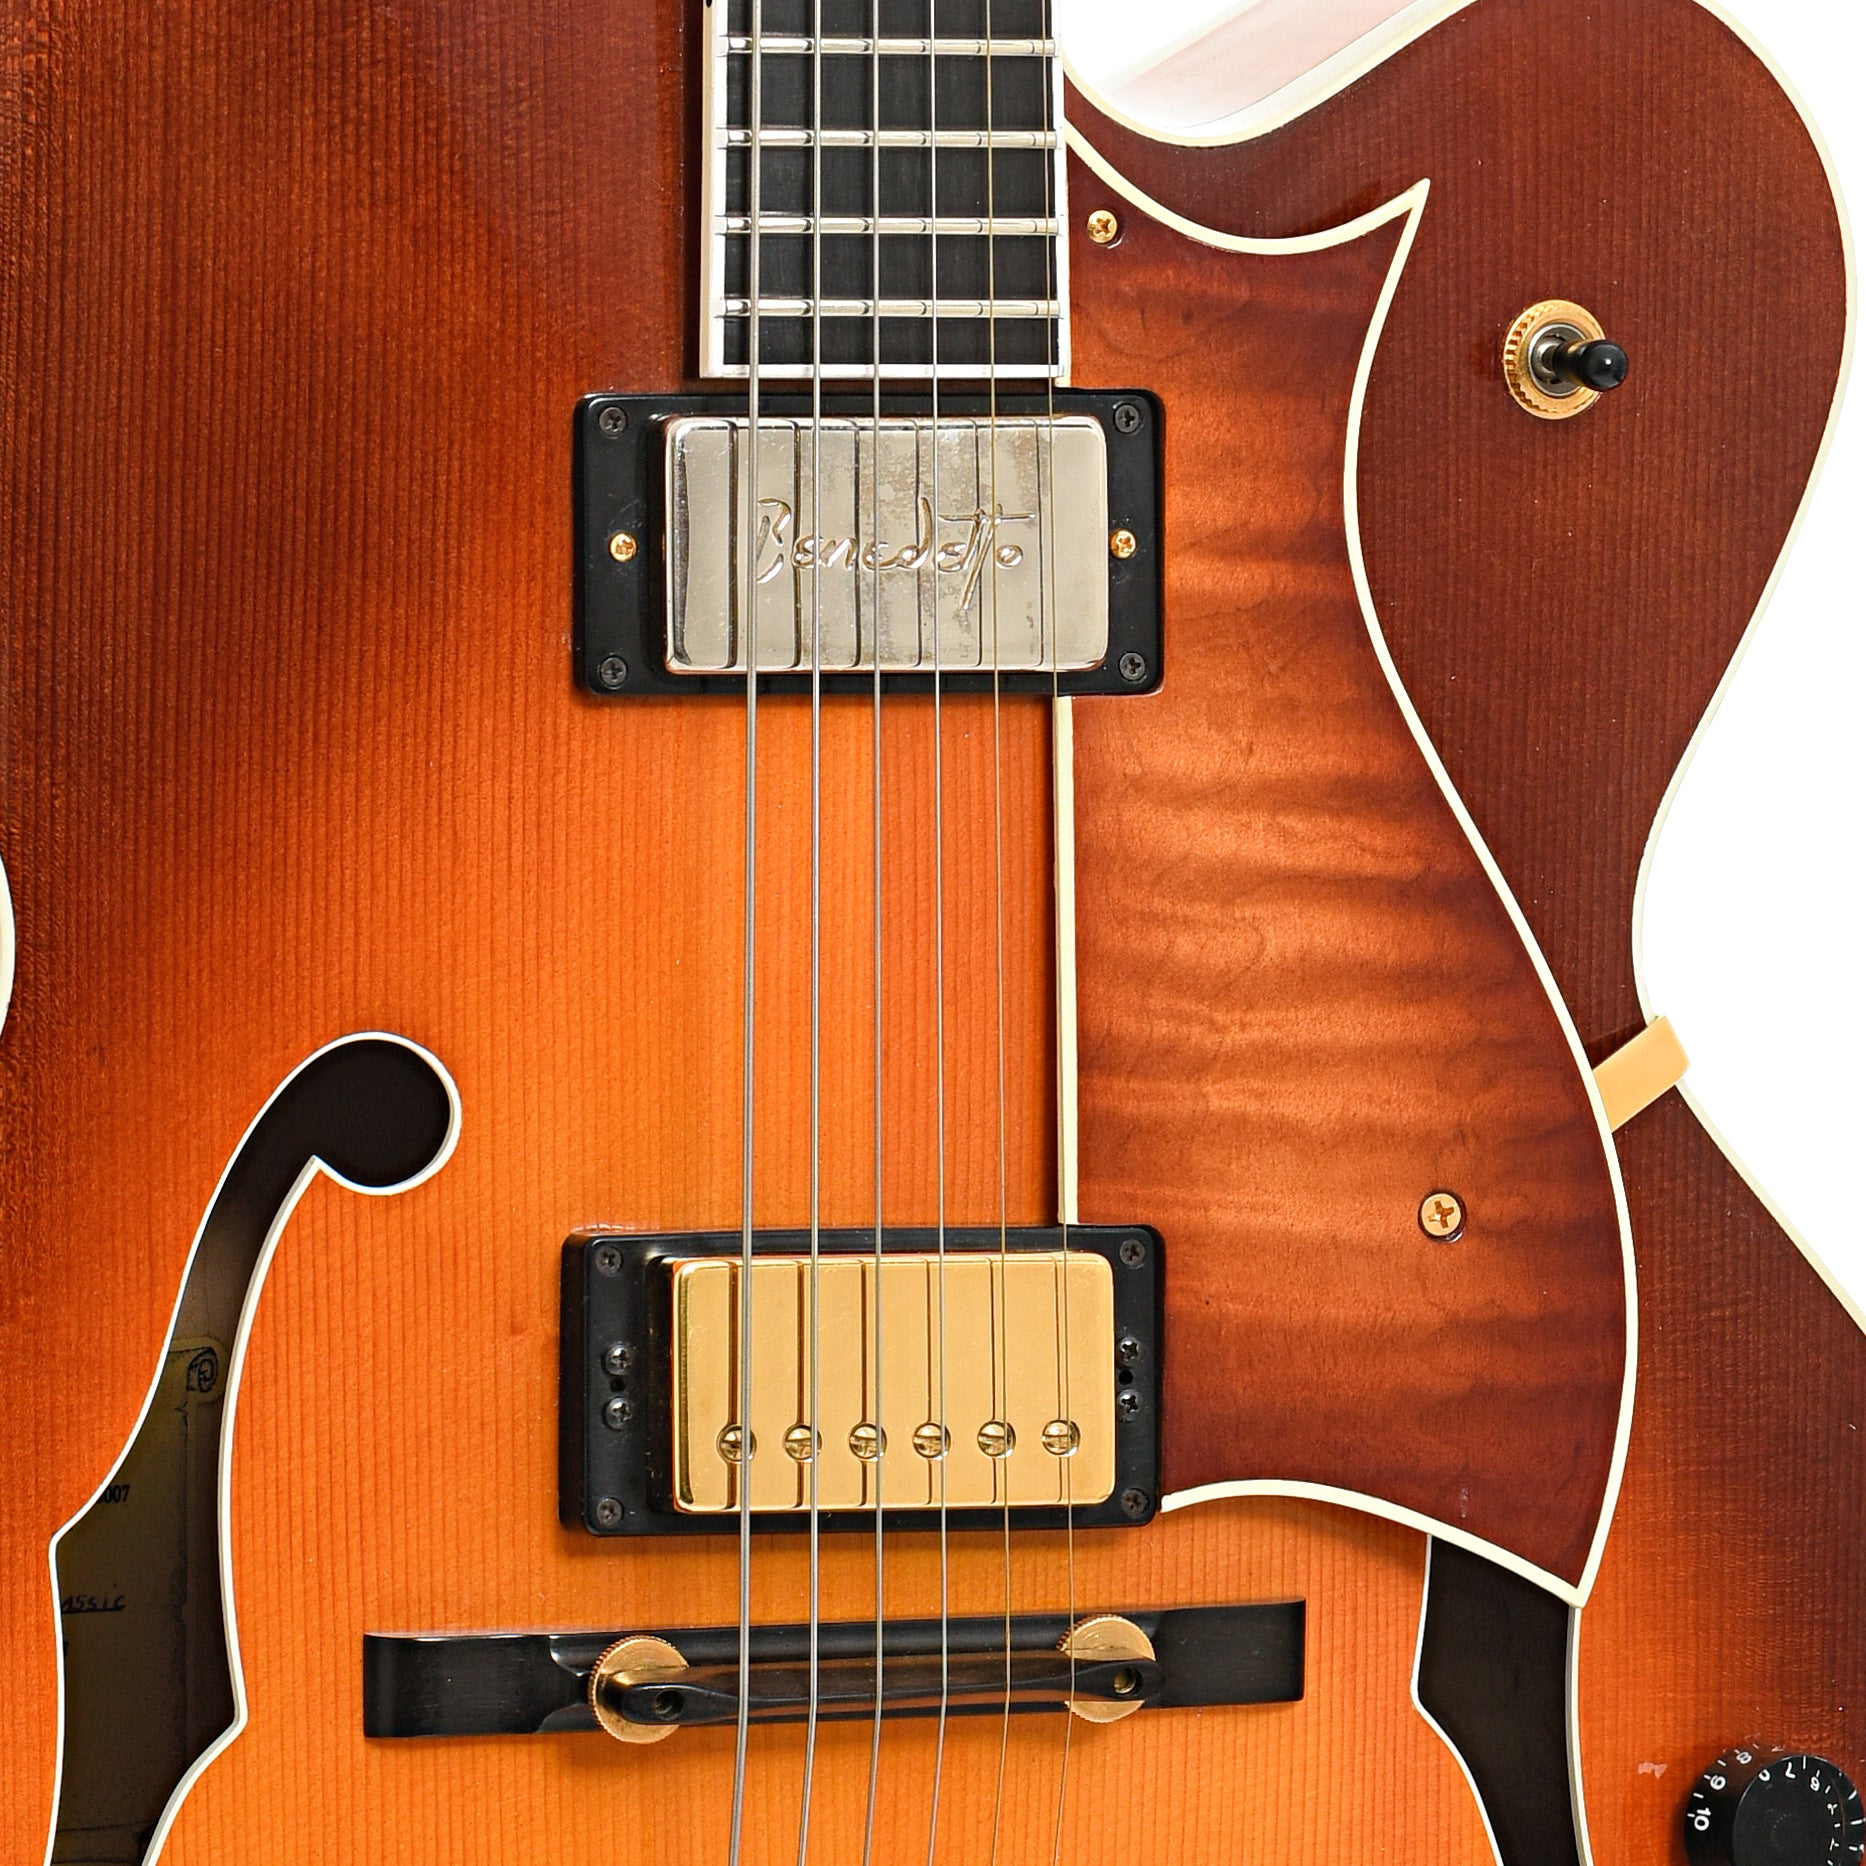 Pickups of Heritage Eagle Classic Hollowbody Electric Guitar (1992)